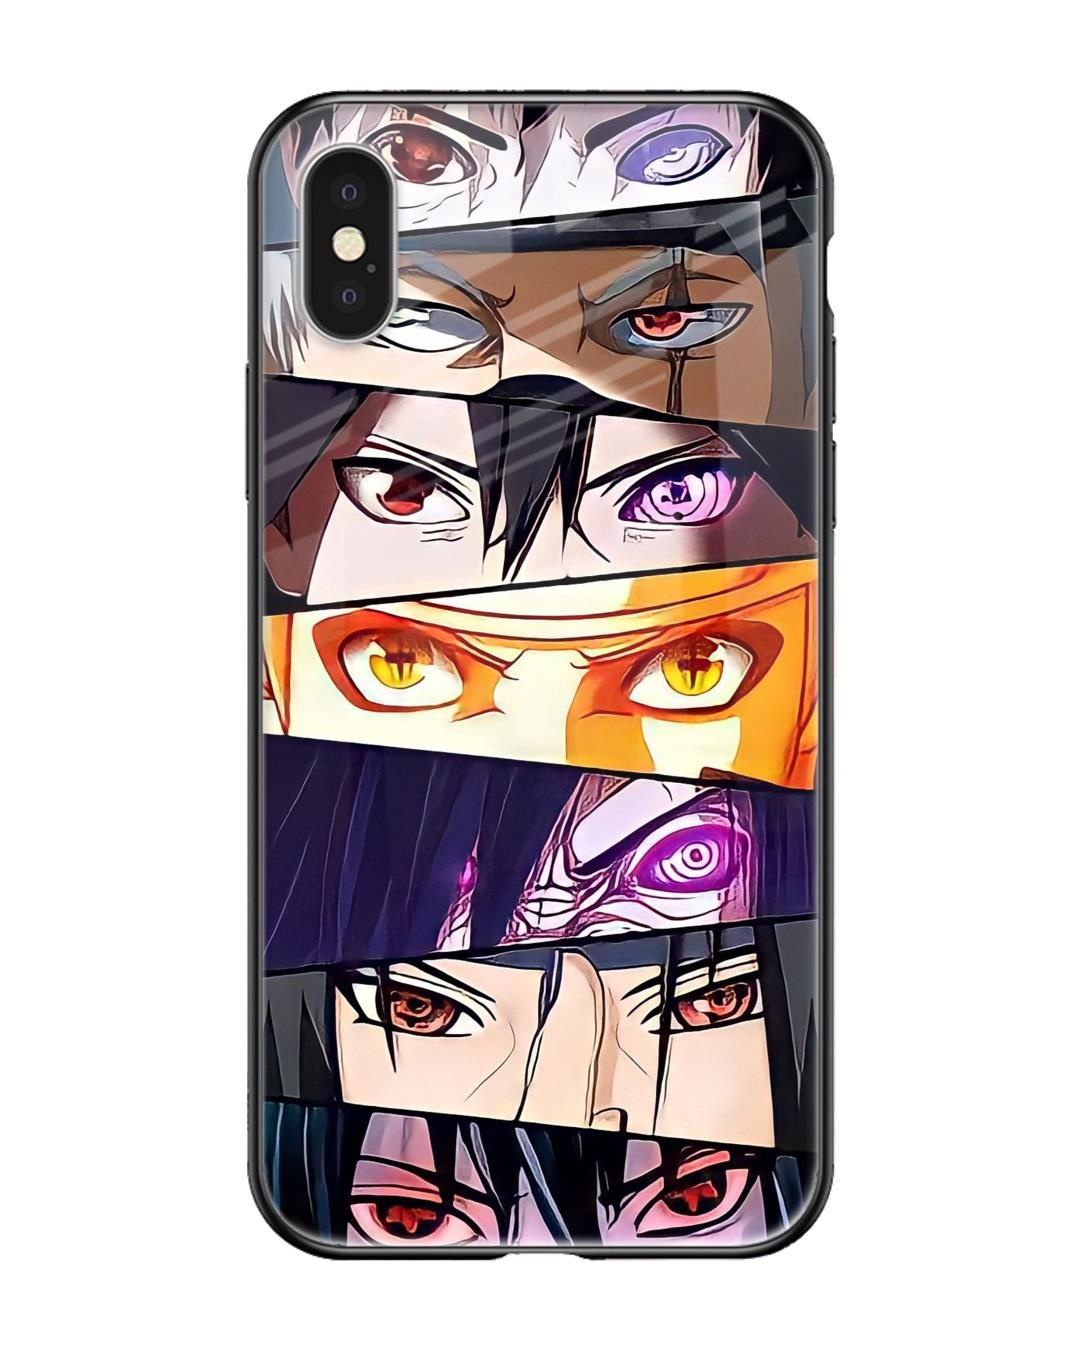 Buy Anime Iphone Case Online In India  Etsy India